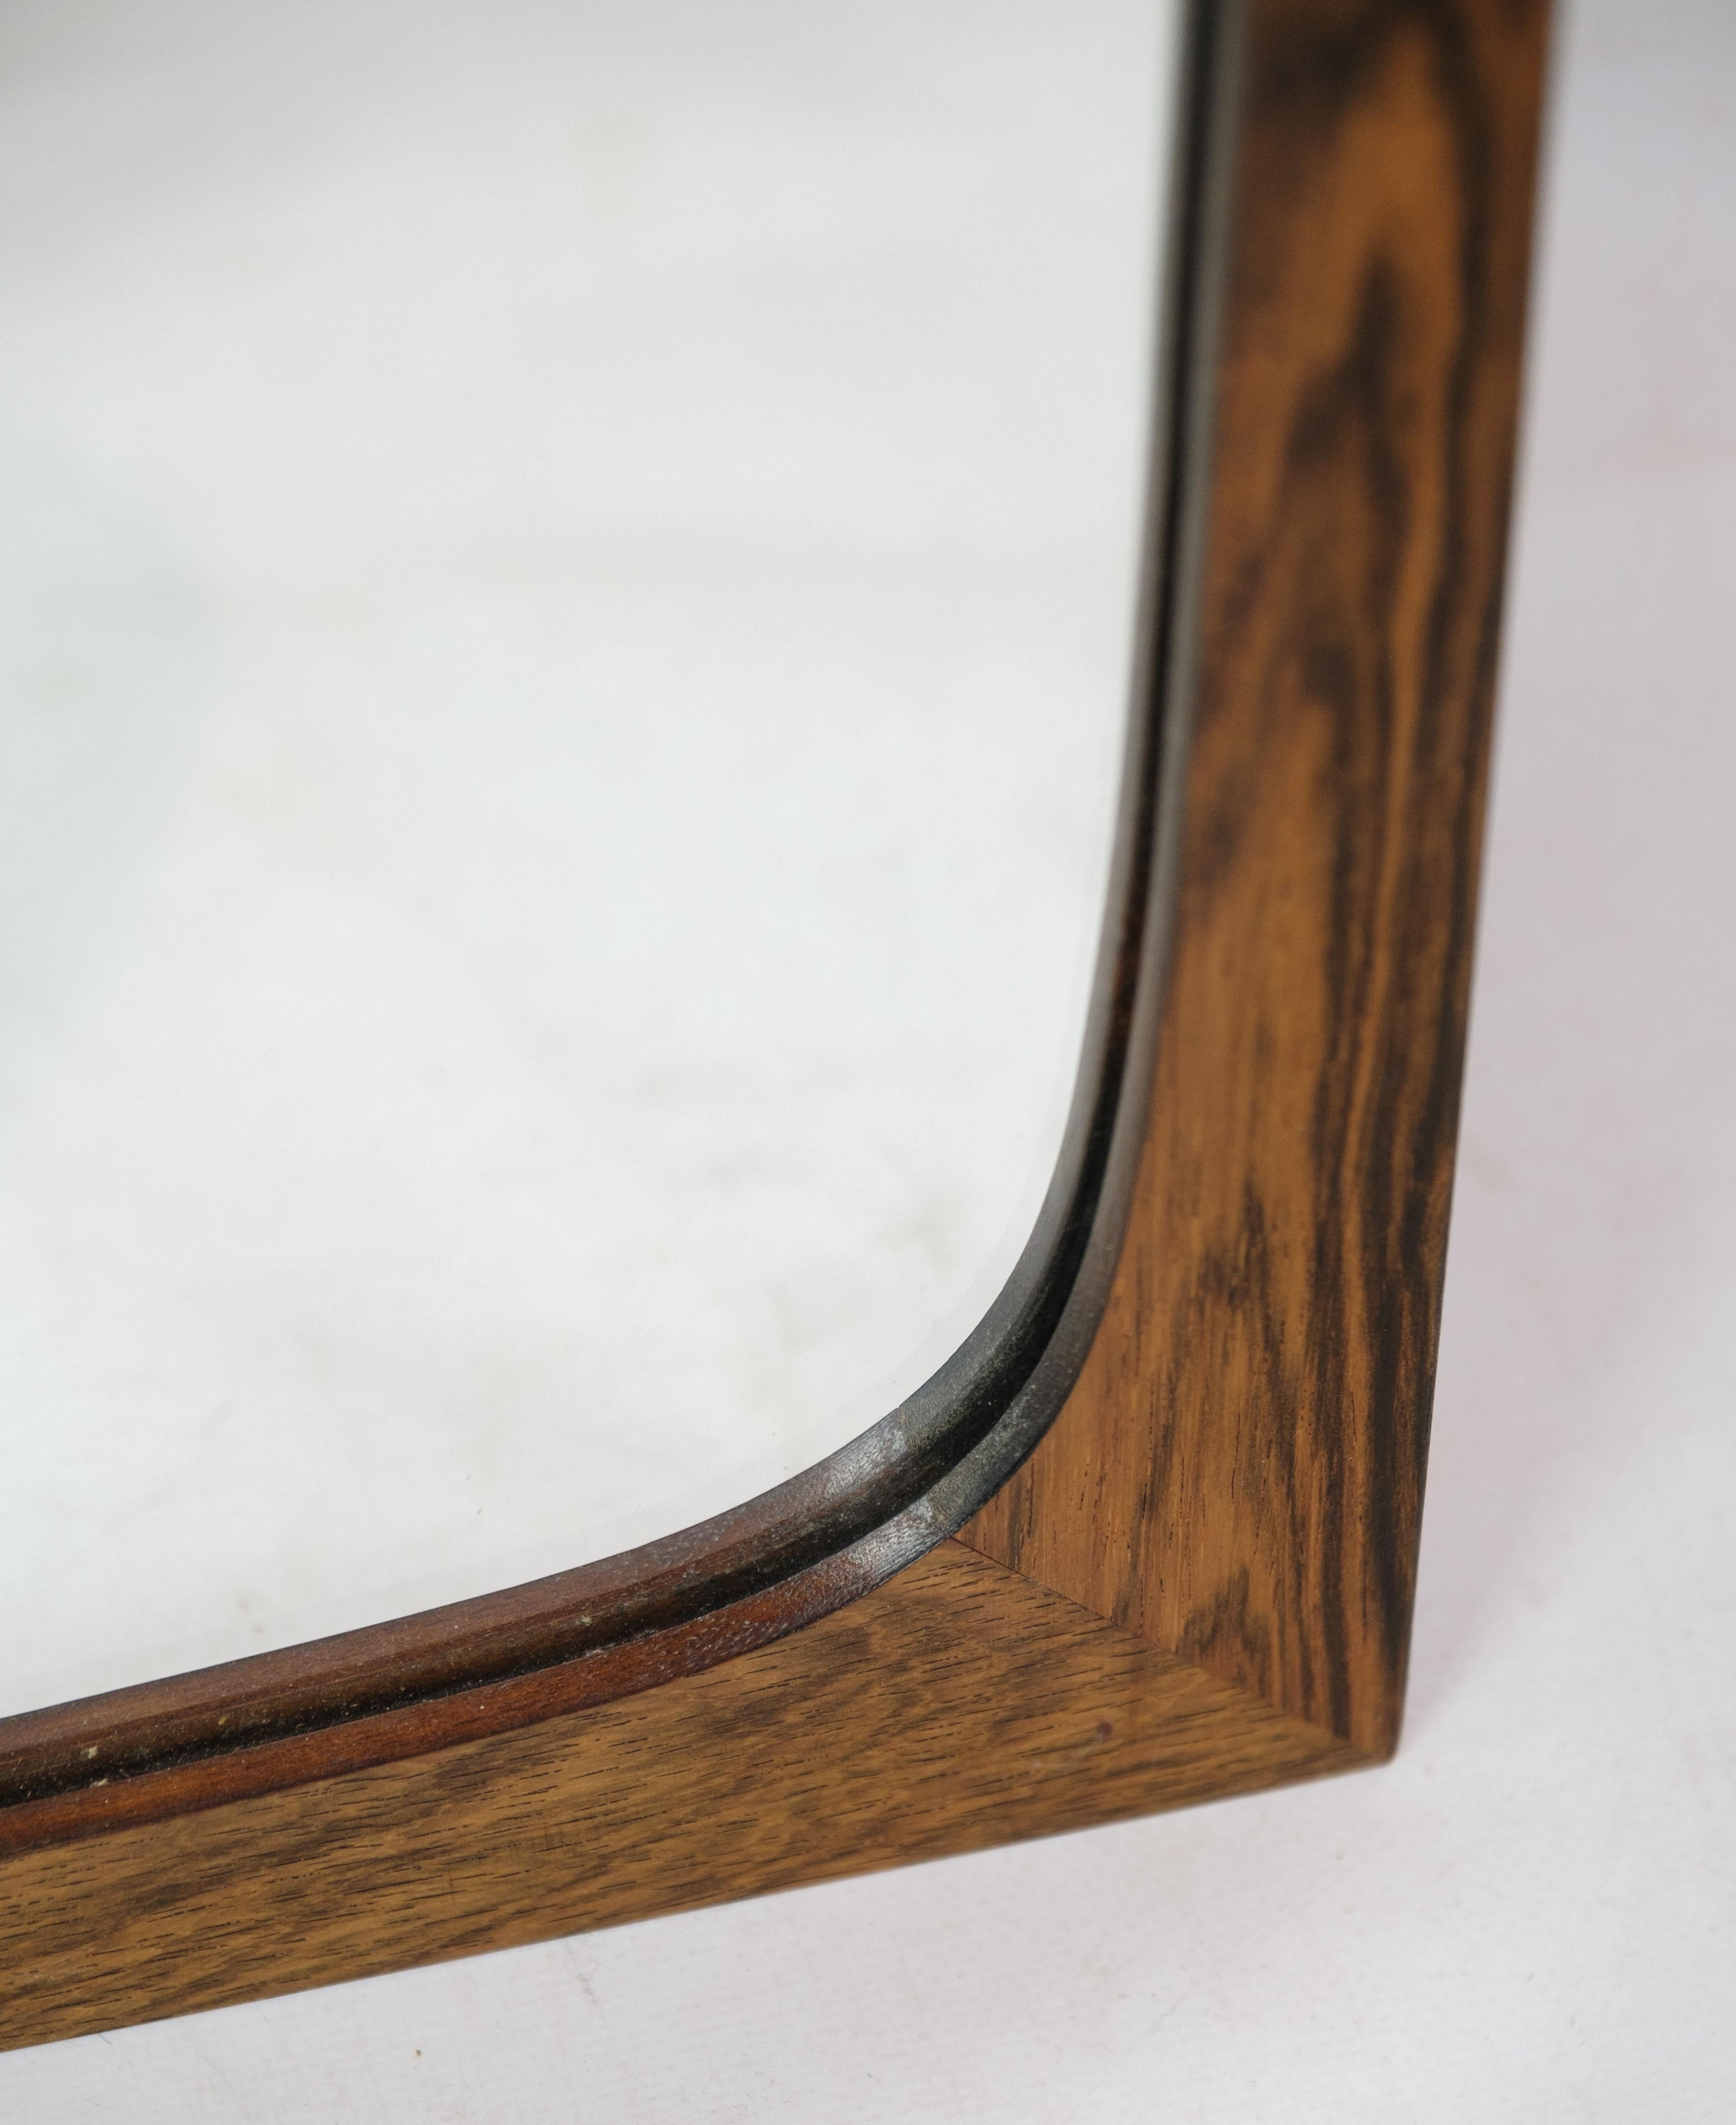 This elongated mirror, crafted from rosewood, is a fine example of Danish design from around the 1960s. With dimensions of H:97 cm and W:42 cm, it exudes the sleek and minimalist aesthetic characteristic of mid-century modern design. The rich hue